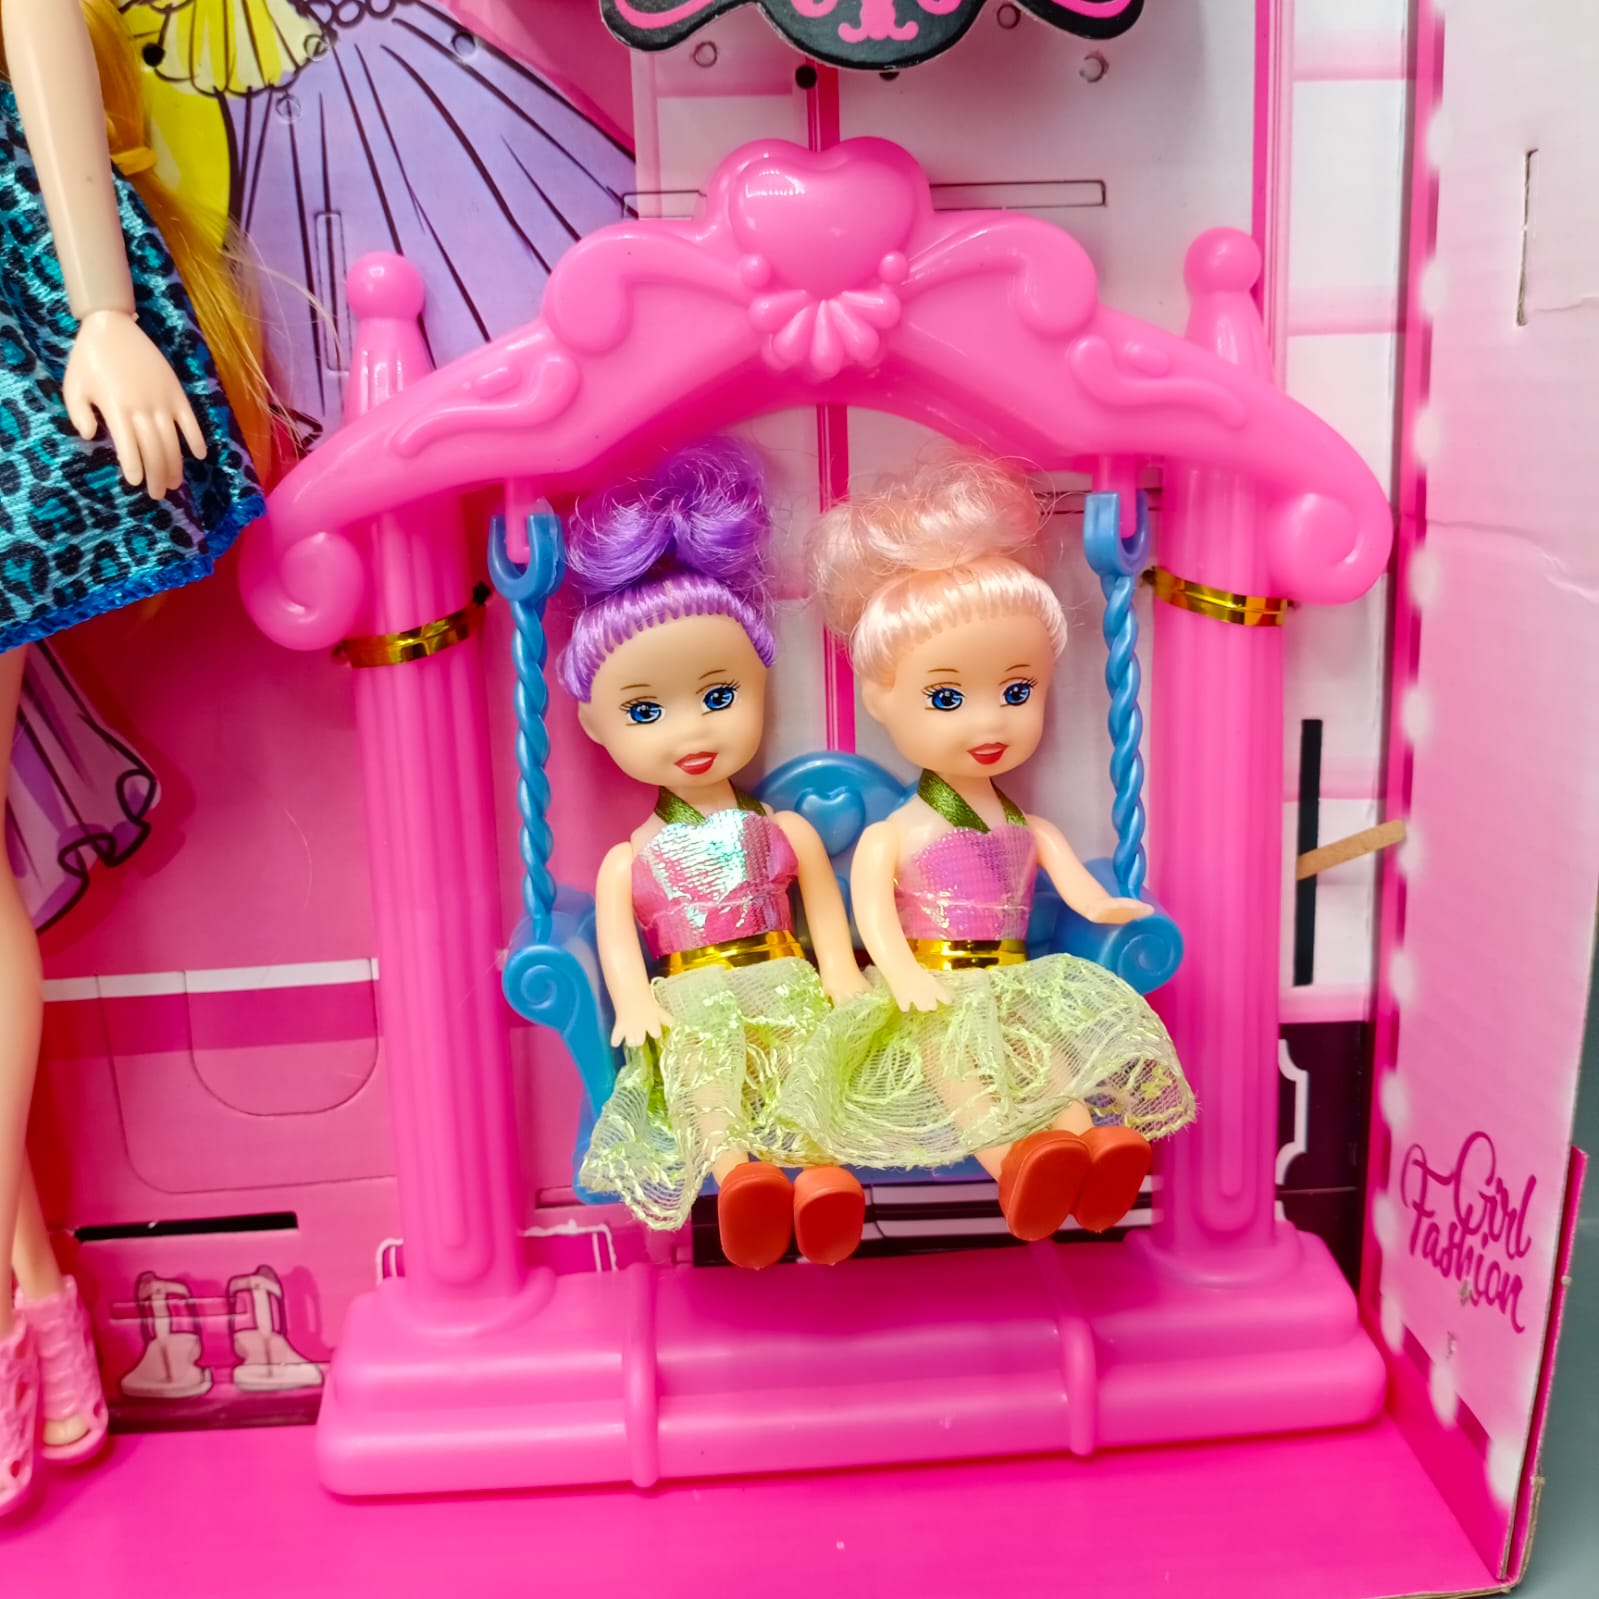 Dolls With Their Personal Wardrobe and House for Kid Girls Play